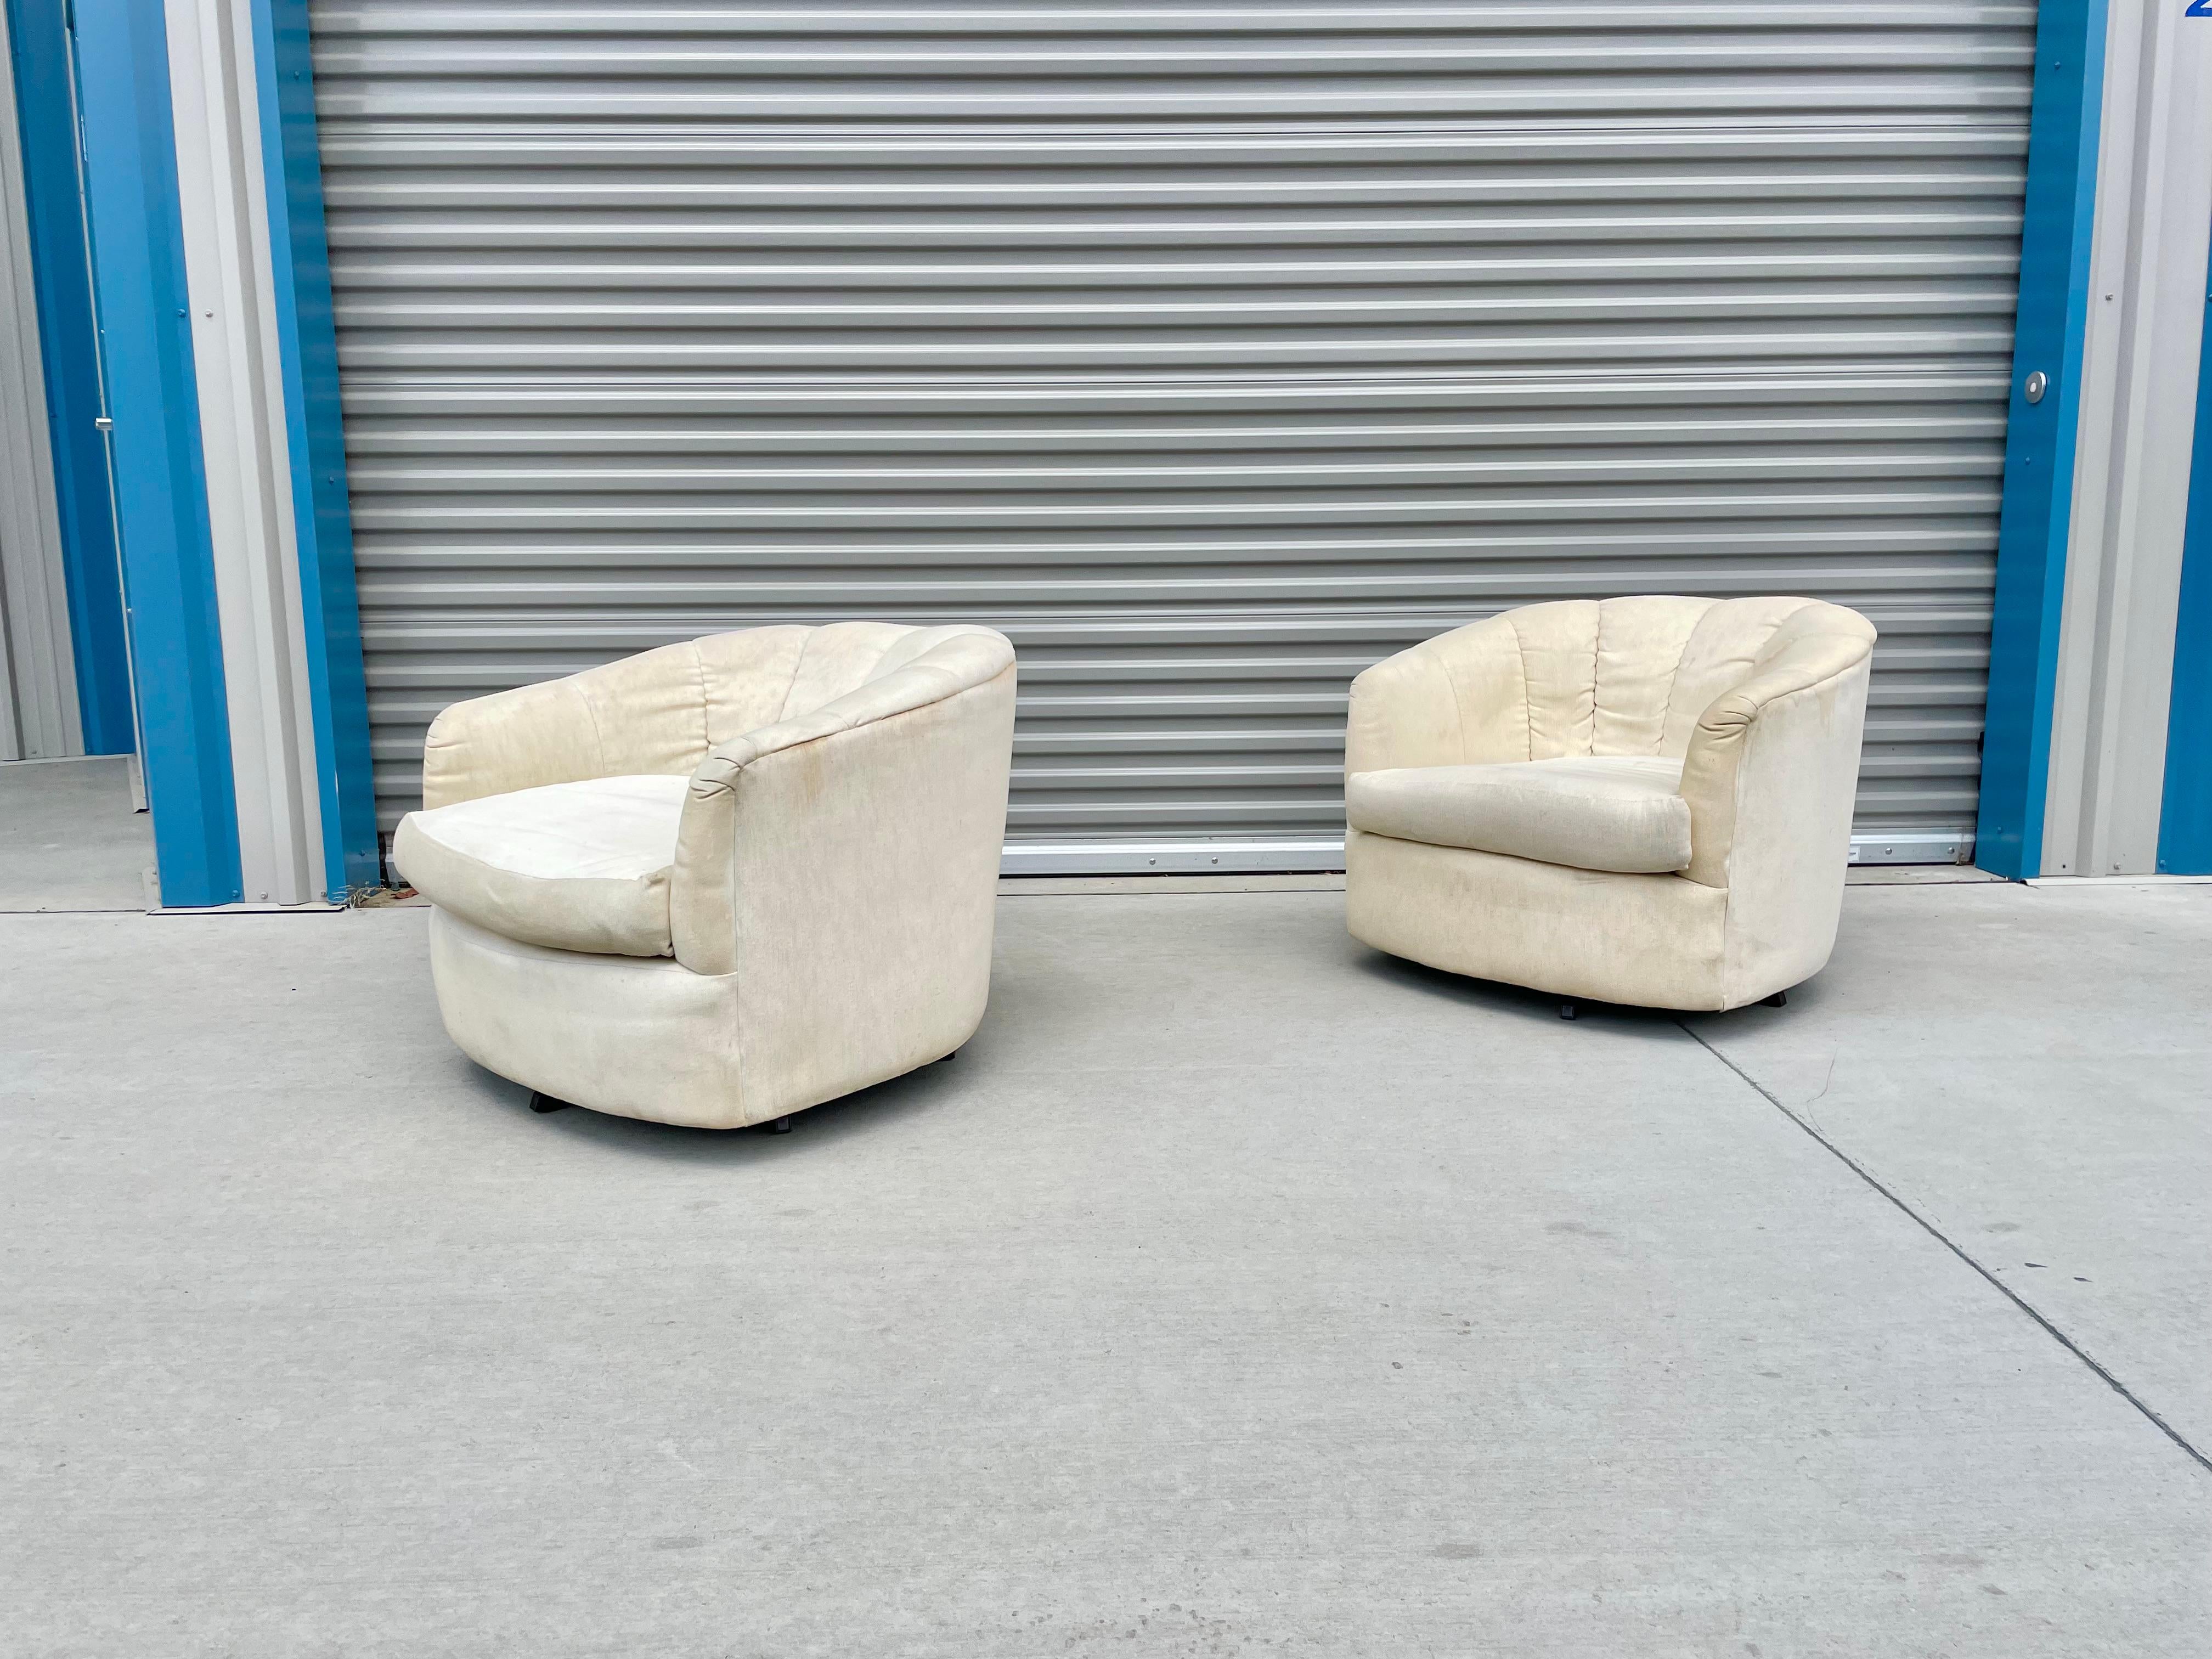 Fantastic vintage pair of barrel chairs styled after Milo Baughman designed and manufactured in the United States, circa 1970s. These beautiful chairs feature a swivel base that rotates 360 degrees. The chairs have a white fabric upholstery that